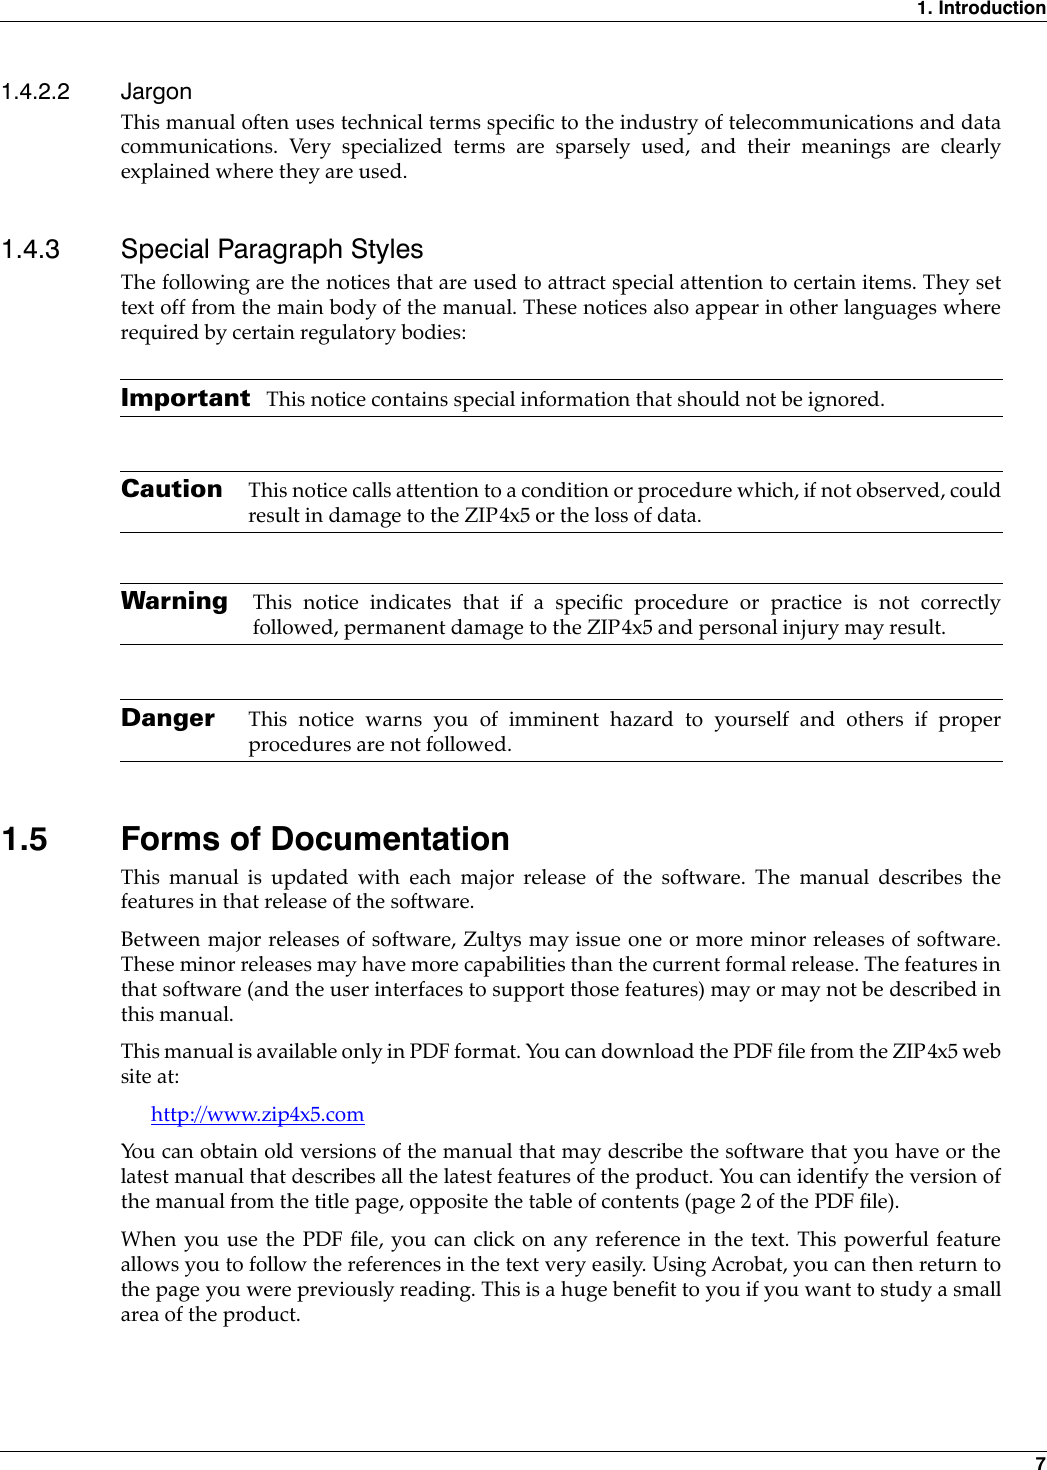 1. Introduction71.4.2.2 JargonThis manual often uses technical terms specific to the industry of telecommunications and datacommunications. Very specialized terms are sparsely used, and their meanings are clearlyexplained where they are used.1.4.3 Special Paragraph StylesThe following are the notices that are used to attract special attention to certain items. They settext off from the main body of the manual. These notices also appear in other languages whererequired by certain regulatory bodies:Important This notice contains special information that should not be ignored.Caution This notice calls attention to a condition or procedure which, if not observed, couldresult in damage to the ZIP4x5 or the loss of data.Warning This notice indicates that if a specific procedure or practice is not correctlyfollowed, permanent damage to the ZIP4x5 and personal injury may result.Danger This notice warns you of imminent hazard to yourself and others if properprocedures are not followed.1.5 Forms of DocumentationThis manual is updated with each major release of the software. The manual describes thefeatures in that release of the software.Between major releases of software, Zultys may issue one or more minor releases of software.These minor releases may have more capabilities than the current formal release. The features inthat software (and the user interfaces to support those features) may or may not be described inthis manual.This manual is available only in PDF format. You can download the PDF file from the ZIP4x5 website at:http://www.zip4x5.comYou can obtain old versions of the manual that may describe the software that you have or thelatest manual that describes all the latest features of the product. You can identify the version ofthe manual from the title page, opposite the table of contents (page 2 of the PDF file).When you use the PDF file, you can click on any reference in the text. This powerful featureallows you to follow the references in the text very easily. Using Acrobat, you can then return tothe page you were previously reading. This is a huge benefit to you if you want to study a smallarea of the product.